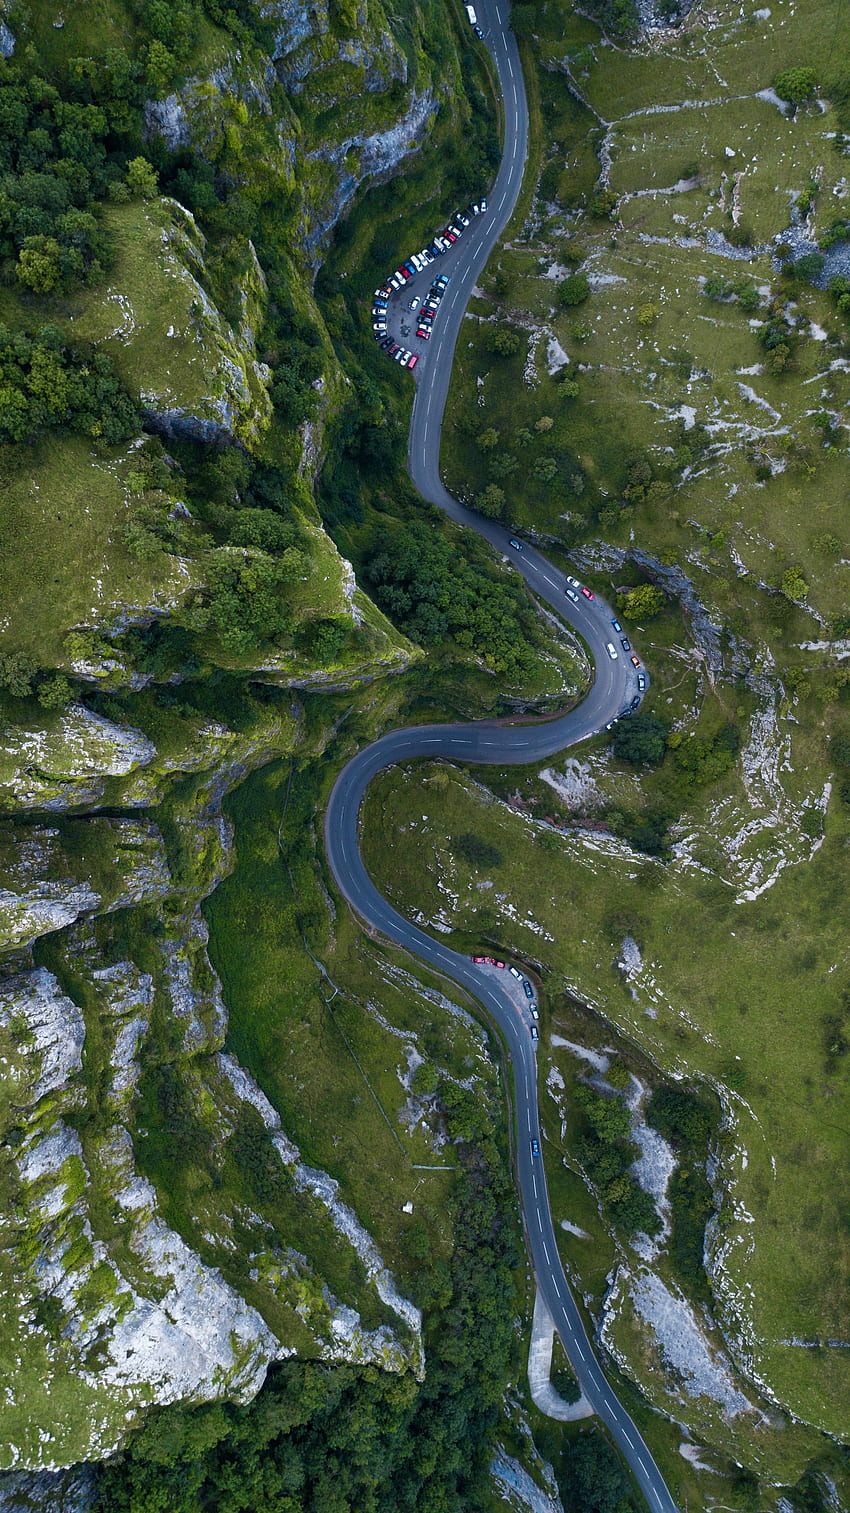 Nature, Mountains, Great Britain, Cars, View From Above, Road, Winding, Sinuous, United Kingdom, Cheddar HD phone wallpaper